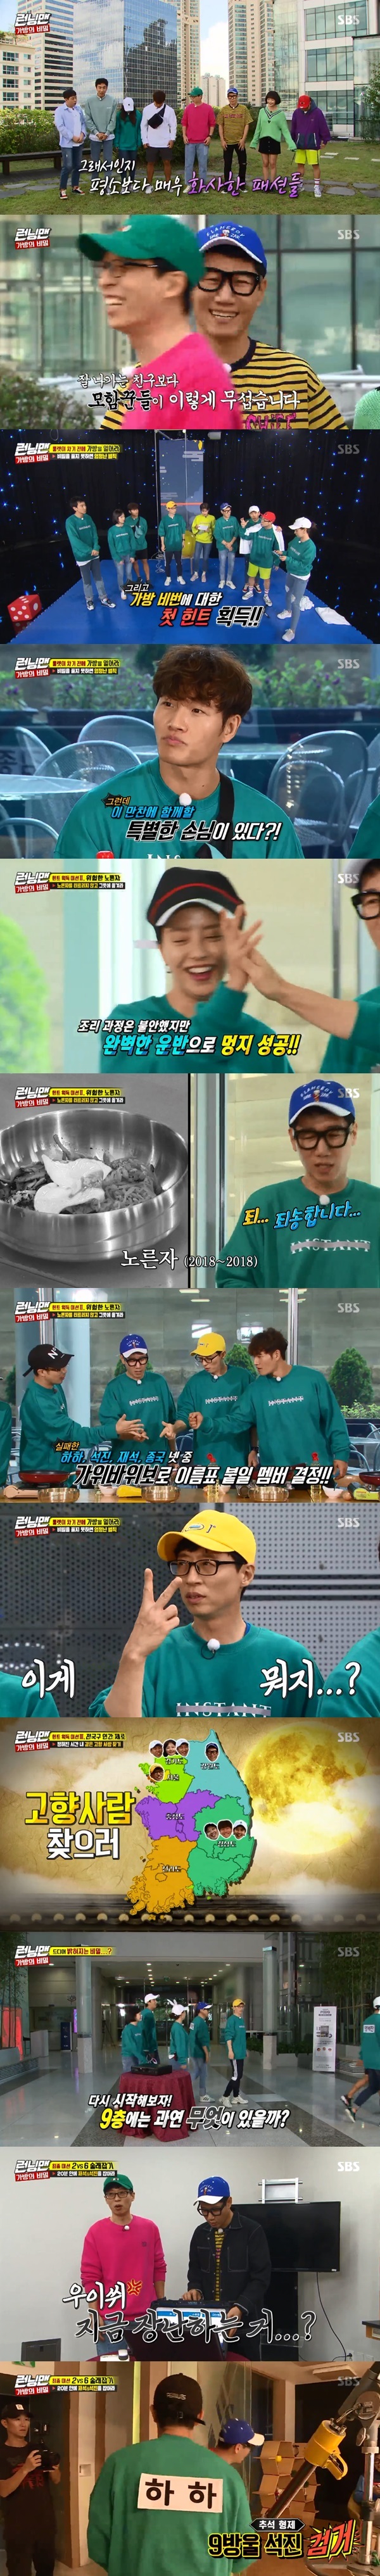 (Seoul=) = In Running Man, a race was held to get the password of the bag. Yoo Jae-seok and Ji Seok-jin won the blank ticket and left where the production team wanted.On SBS Running Man, which was broadcast on the afternoon of the 23rd, there was a race to reveal the secret of the bag.In order to get the three-digit password in the bag, the Running Man member had to succeed as much as the number of dice per mission.If the mission failed, it was a penalty roulette board with a name tag, and if the roulette failed to open the bag before the kick, it was a penalty game.The first hint mission was The Full Moon is the Ground: catching a line on a water balloon, settling it to the Safe Zone was a successful game; three people had to succeed to get a hint.Kim Jong Kook, Song Ji Hyo, and Ji Seok Jin succeeded in getting hints. The hints given were biger than Yoo Jae Suk and smaller than Haha.The second mission to get a hint was to use a fork to succeed if you move the yolk on the bibimbap in 100 seconds without bursting the yolk.The second mission was successful and the hint was a picture of two fingers.The mission for the third hint was National Guernsey Zero: He had to bring home people like himself within five minutes of the time limit.Since then, the number of shouting and the number of people who wake up have to be different for five consecutive times.The members of the Running Man who received the hint speculated that the Jungjap was a one-gai: We expected the 15th of the lunar month in a three-digit password; inside the open bag was a message to go to the 9th floor.The members who arrived on the 9th floor were given a mission to catch Ji Seok-jin and Yoo Jae-seok within 20 minutes. Yoo Jae-seok and Ji Seok-jin had to avoid the members with ten drops.The two men had to carry out a blank ticket penalty if caught by the members; if they could not catch the two, two out of six members had to be punished.Yoo Jae-seok and Ji Seok-jin were arrested by the members, and the two were punished for the blank ticket.On the other hand, Running Man is a program that solves the missions of the best entertainers in Korea and reveals the hidden back of the Korean landmarks through constant rush and tense confrontation.It airs every Sunday at 4:50 p.m.